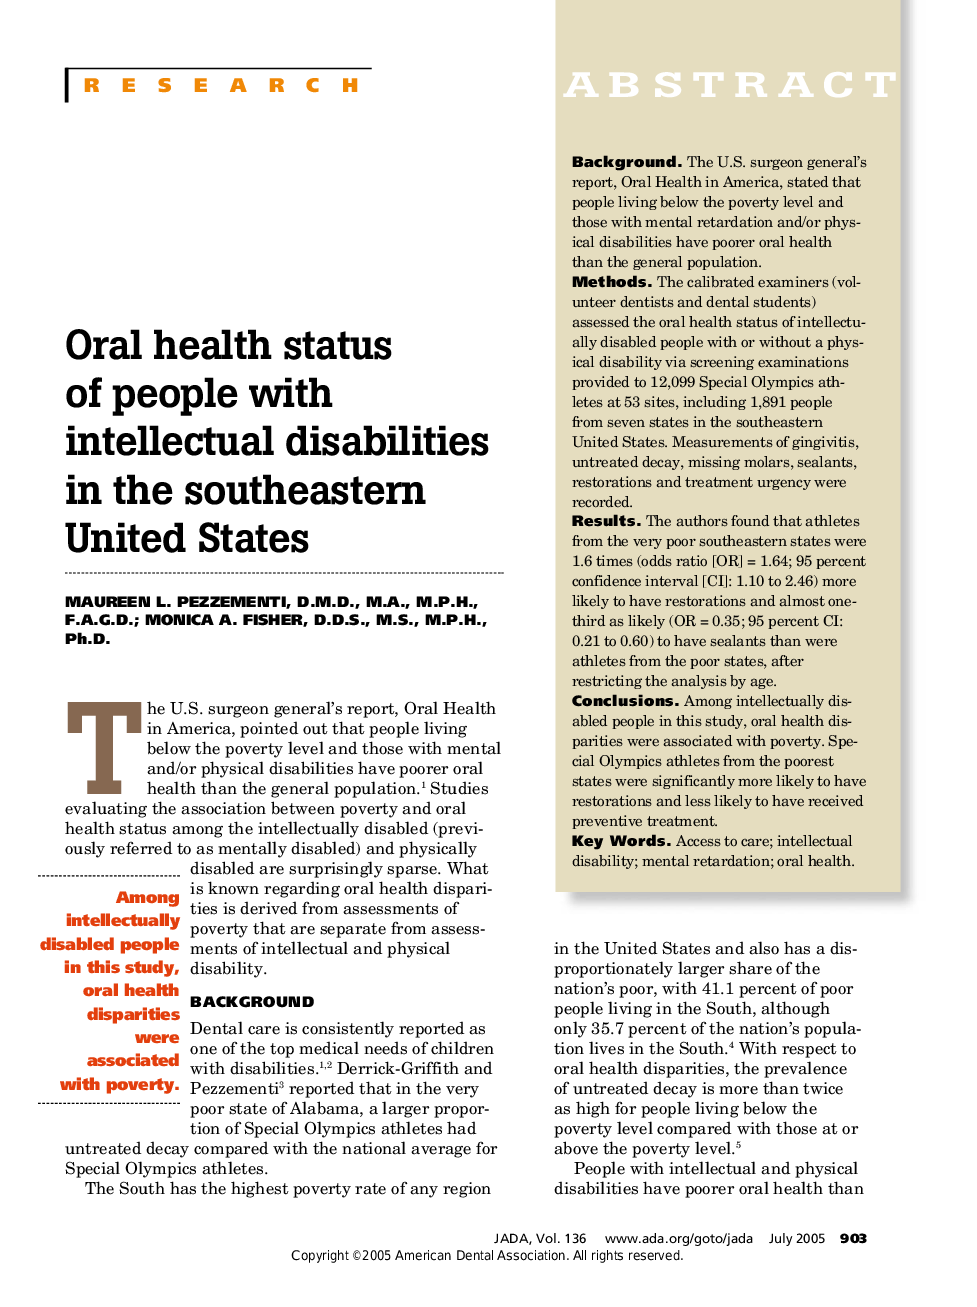 Oral health status of people with intellectual disabilities in the southeastern United States